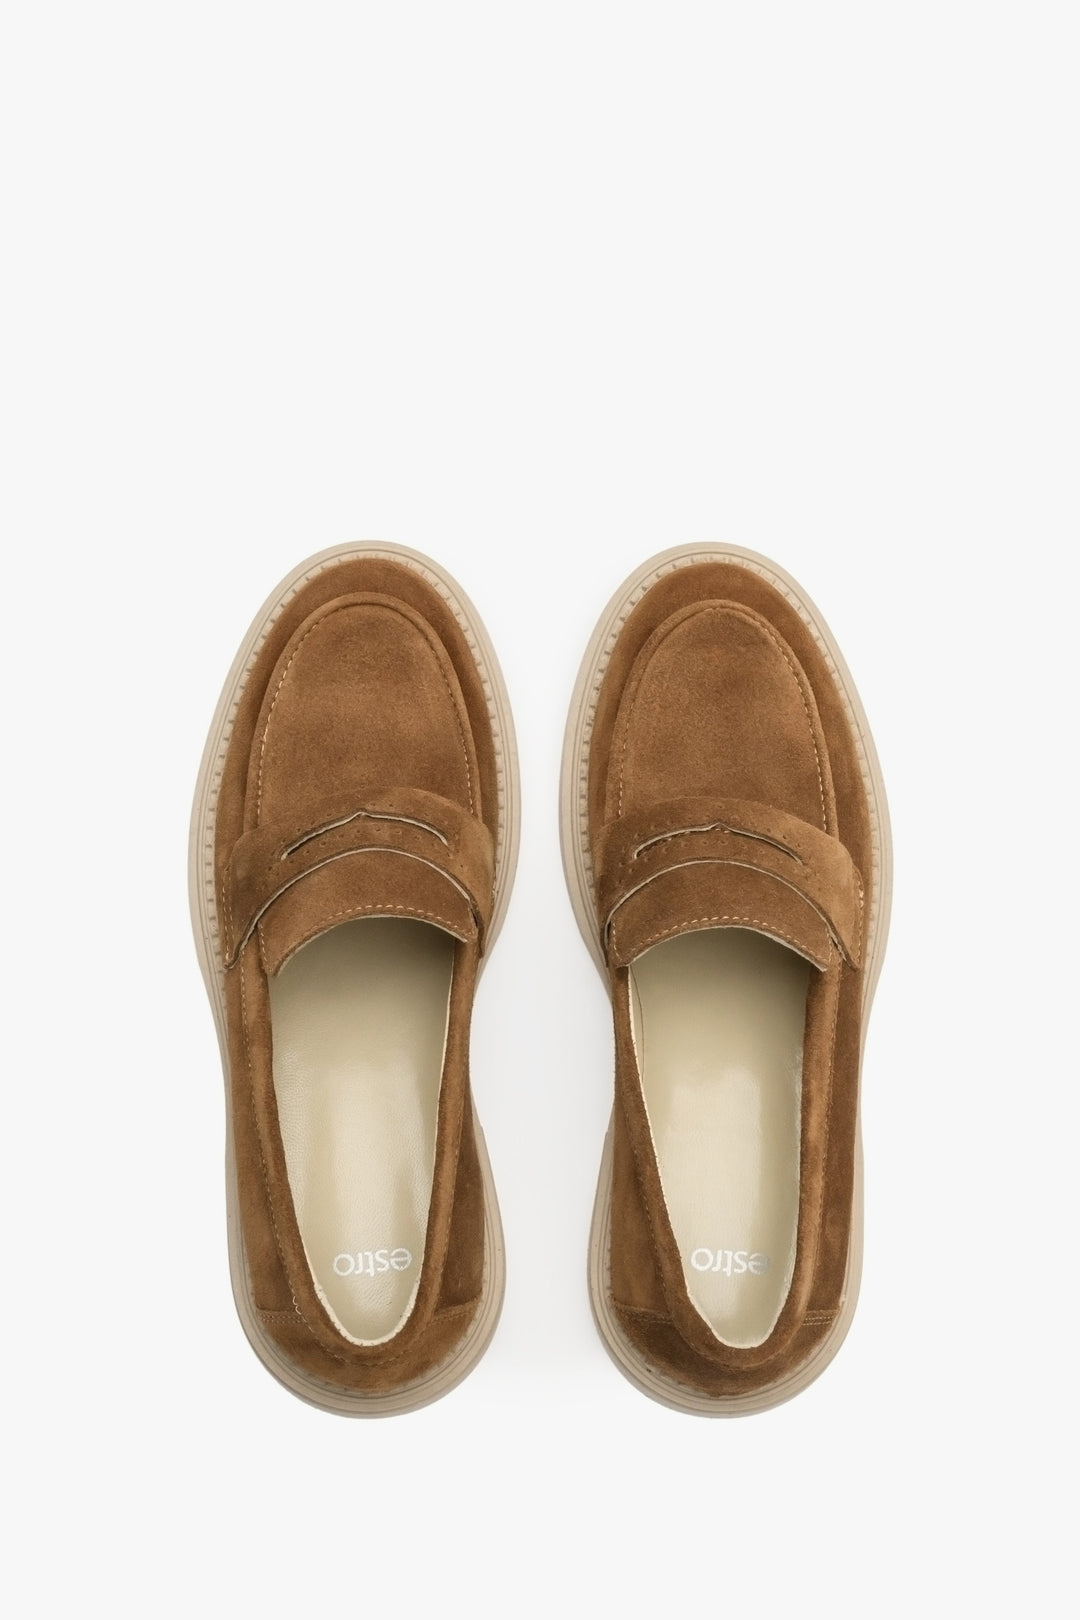 Brown suede loafers for women Estro - presentation of the model from above.